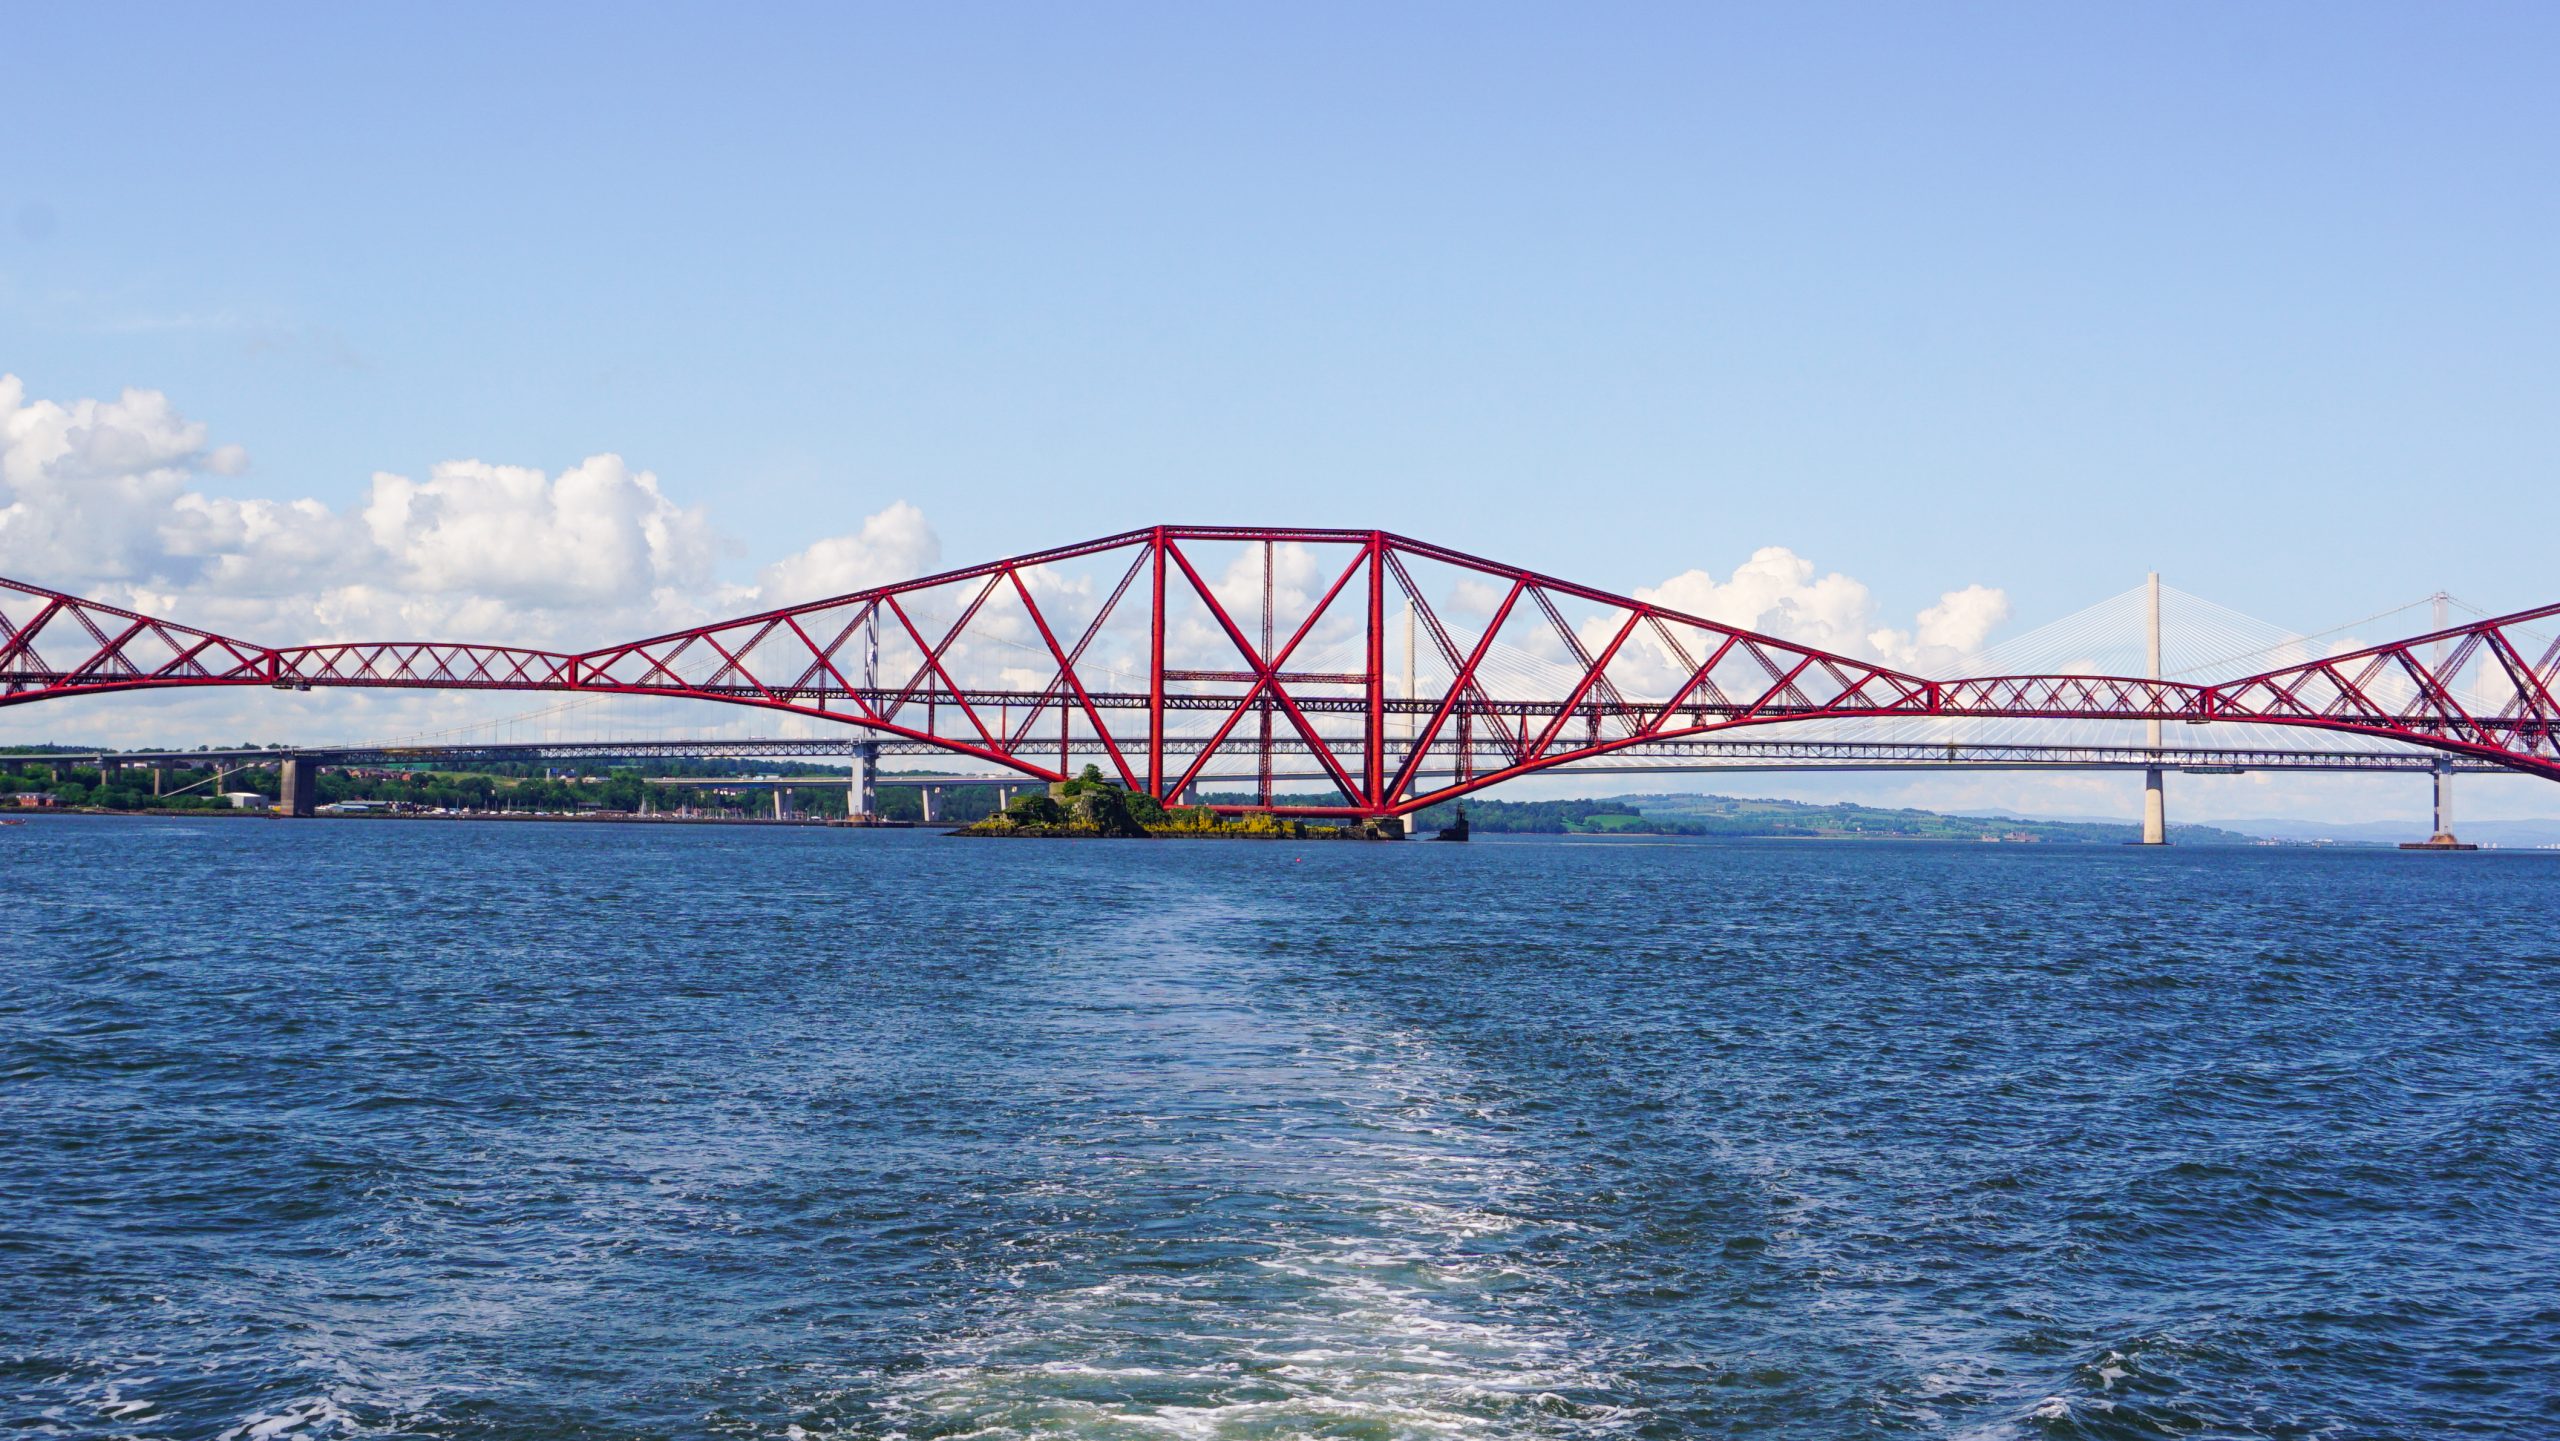 Forth rail bridge from the boat